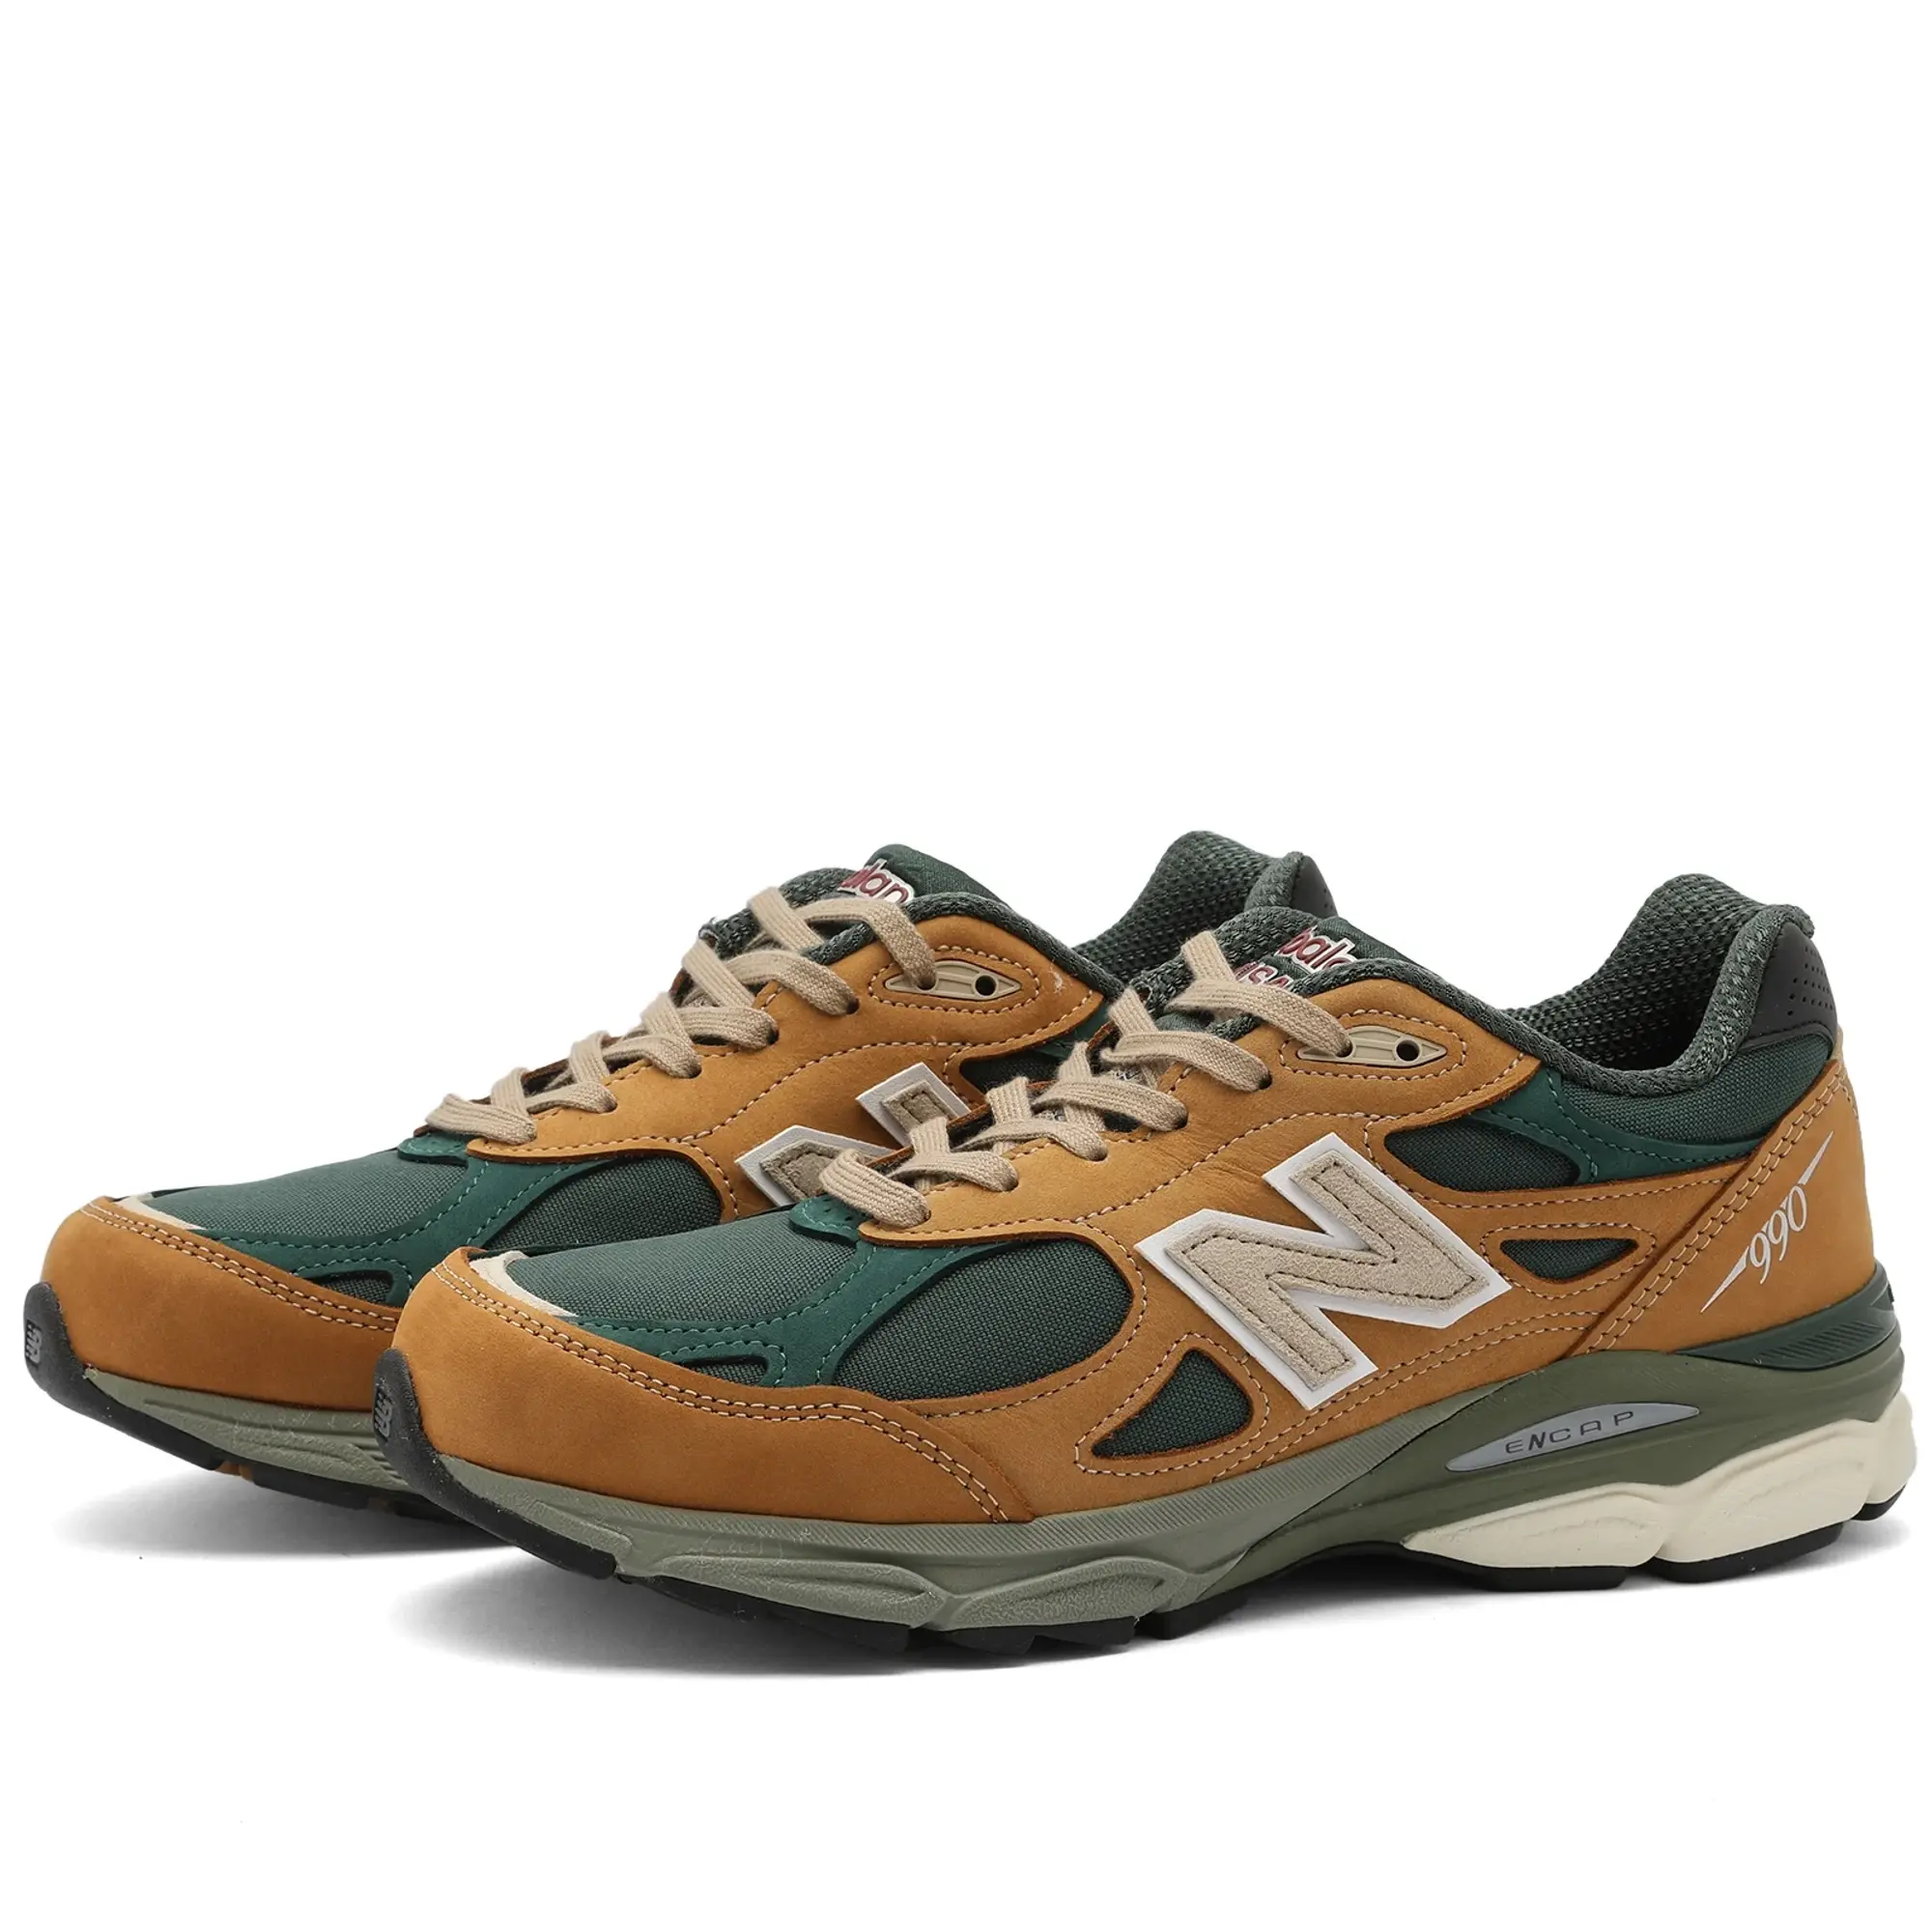 New Balance 990v3 Made in USA Brown Charcoal